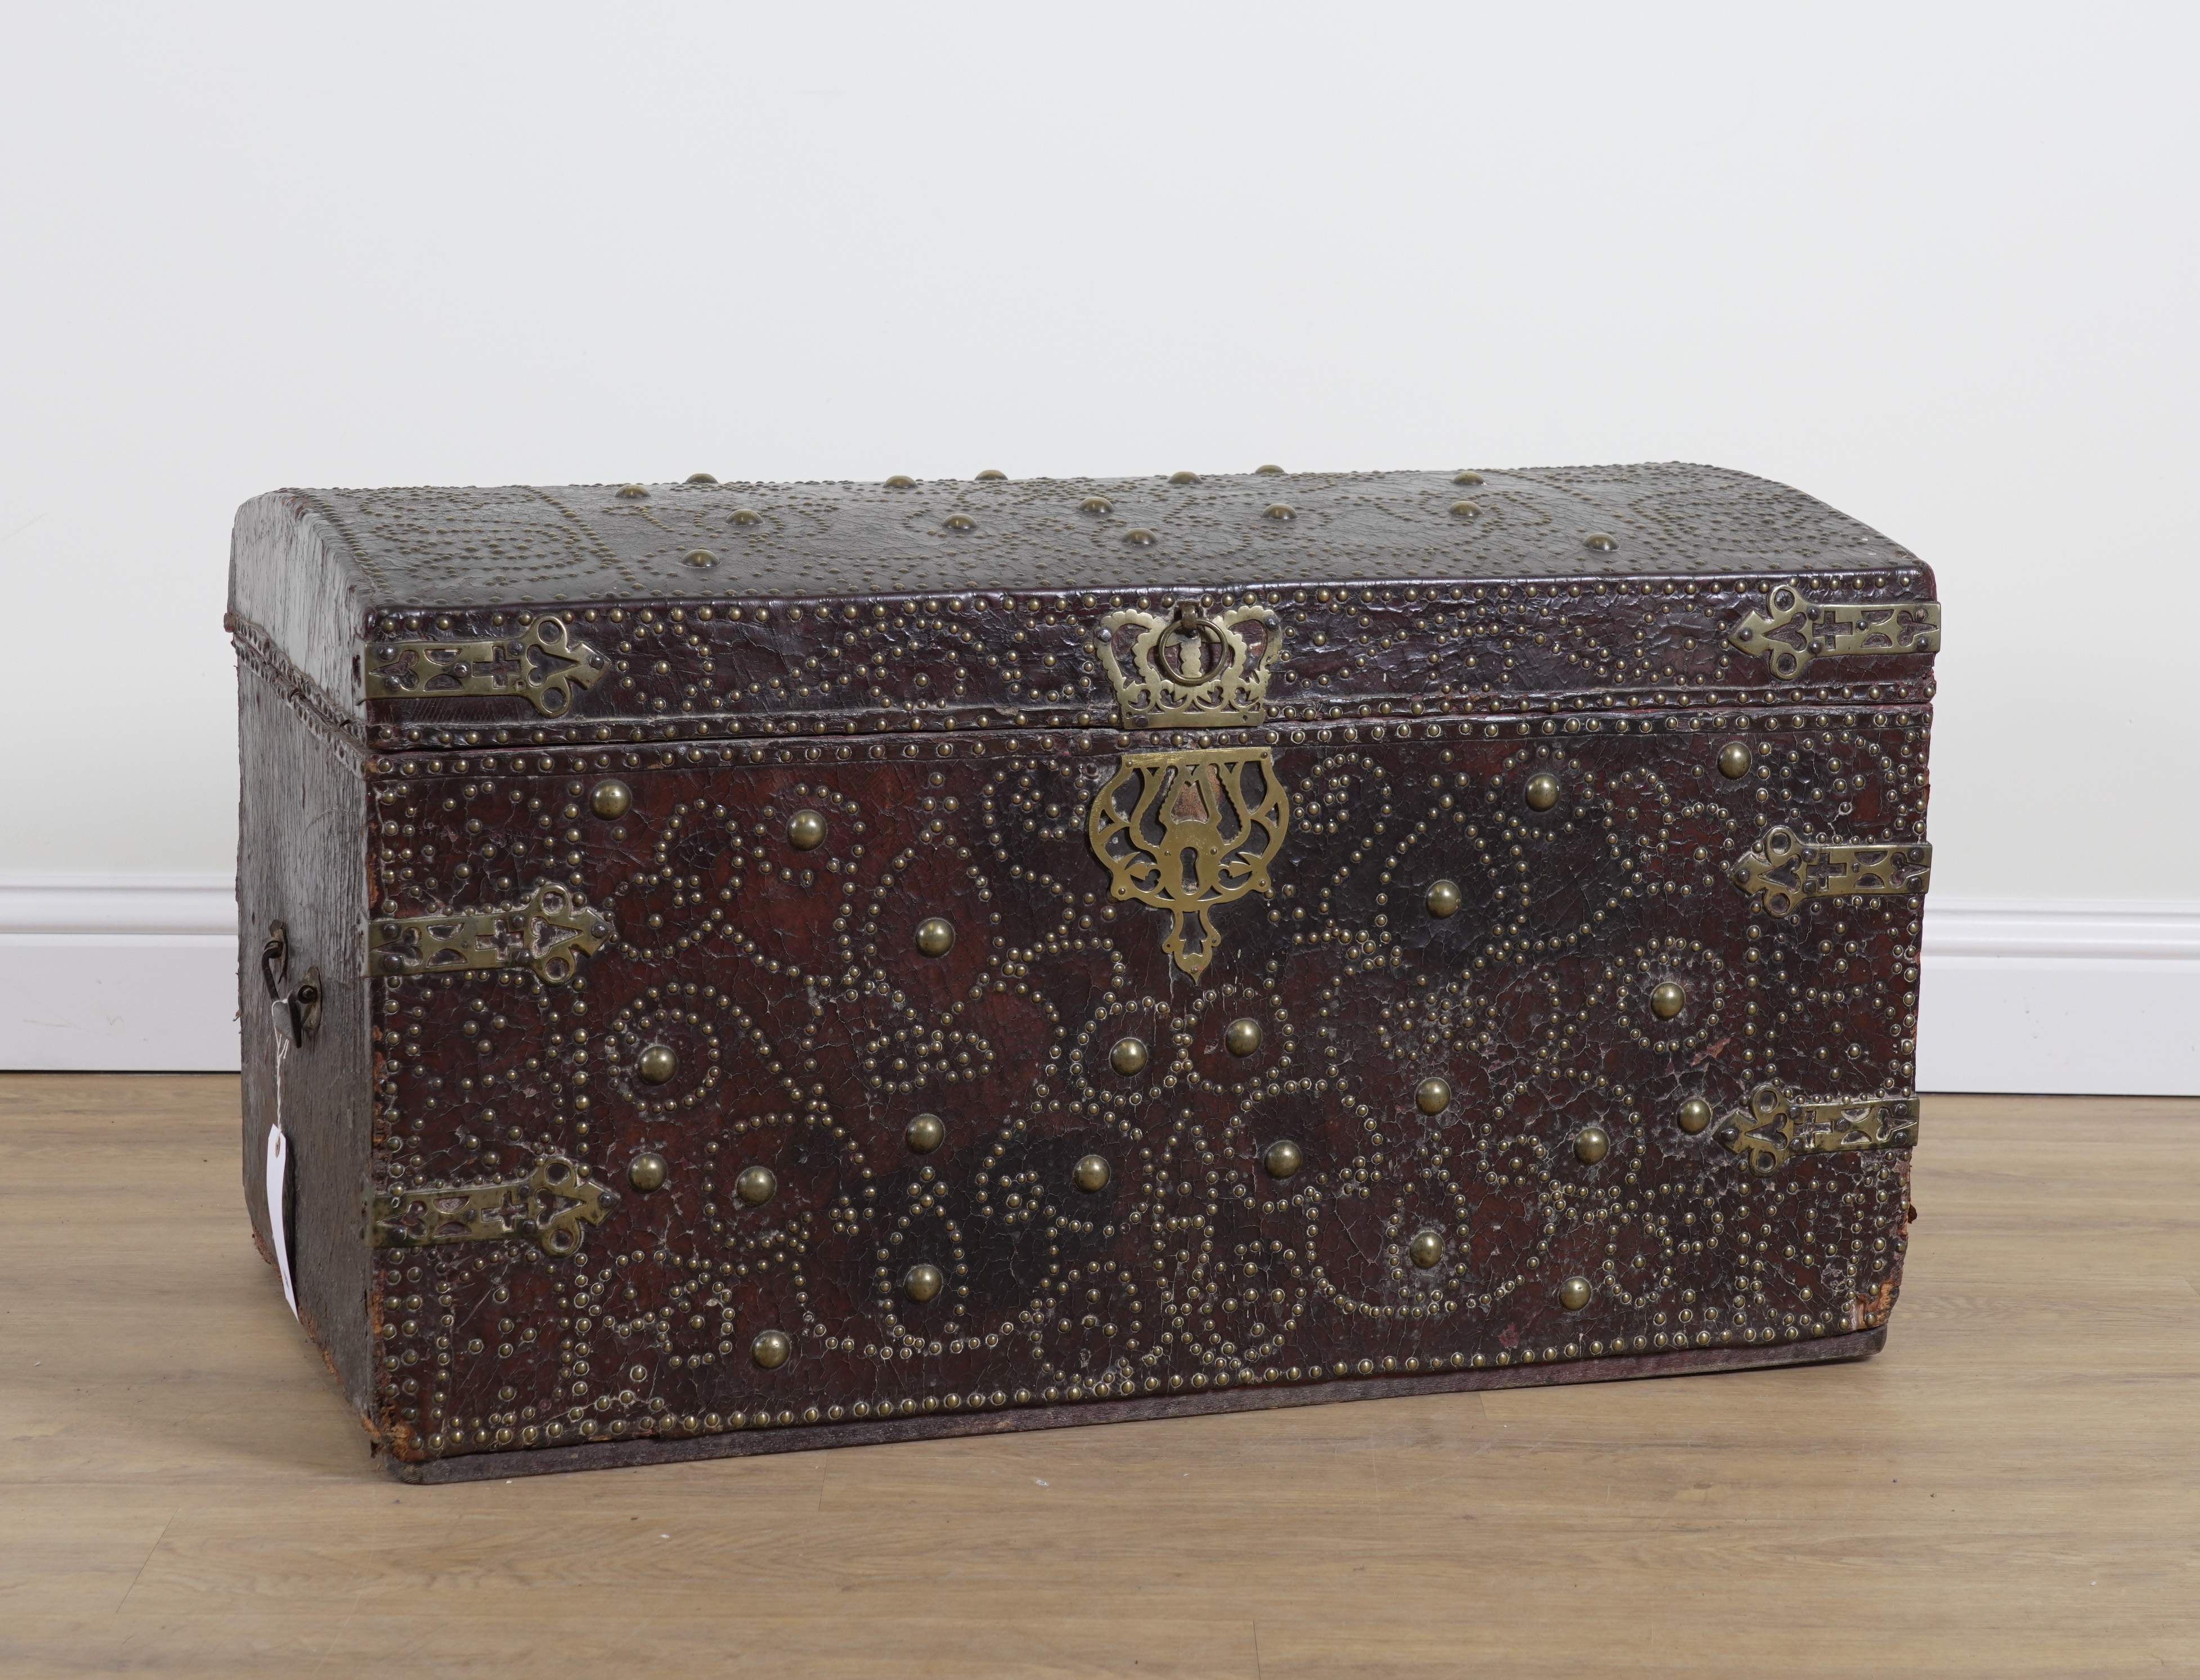 AN EARLY 18TH CENTURY BRASS STUDDED LEATHER VENEERED DOME TOPPED TRUNK